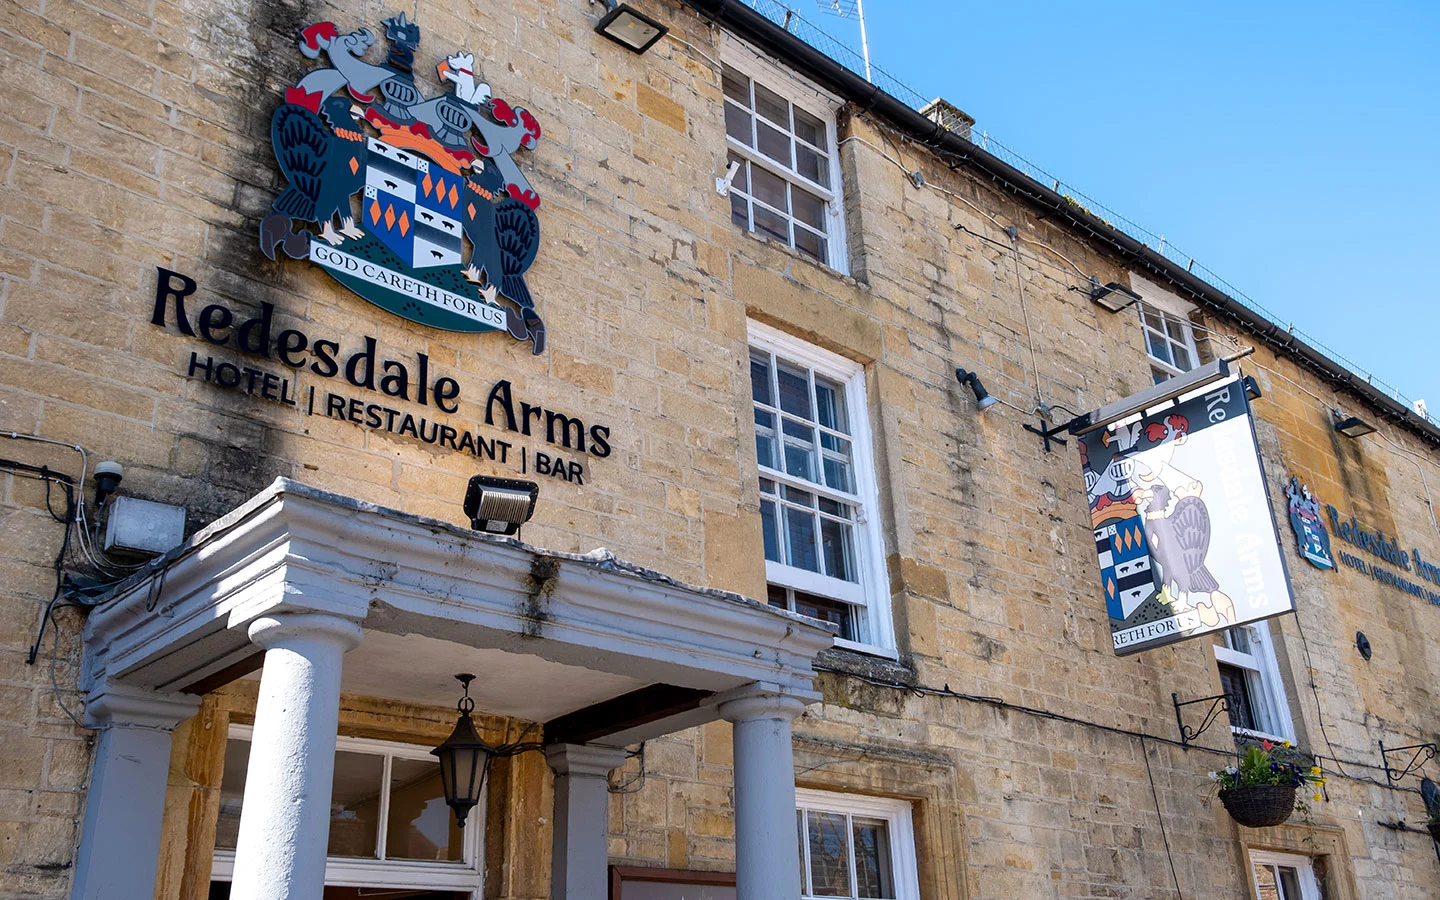 The Redesdale Arms hotel and restaurant